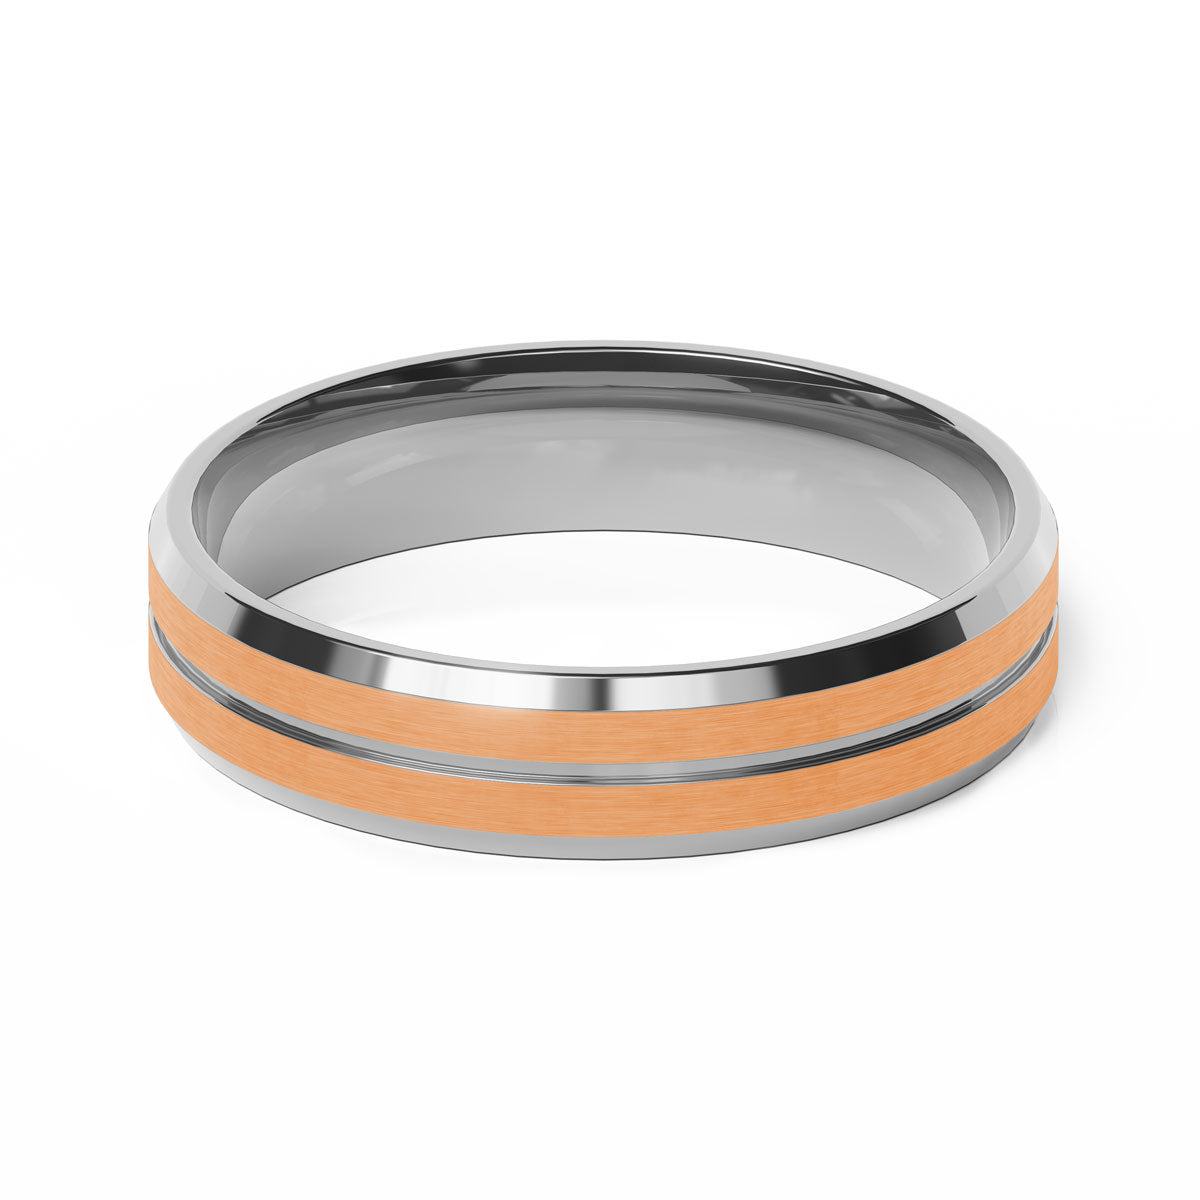 Comfort Fit 5MM Carved Beveled Wedding Band with Narrow Inlay